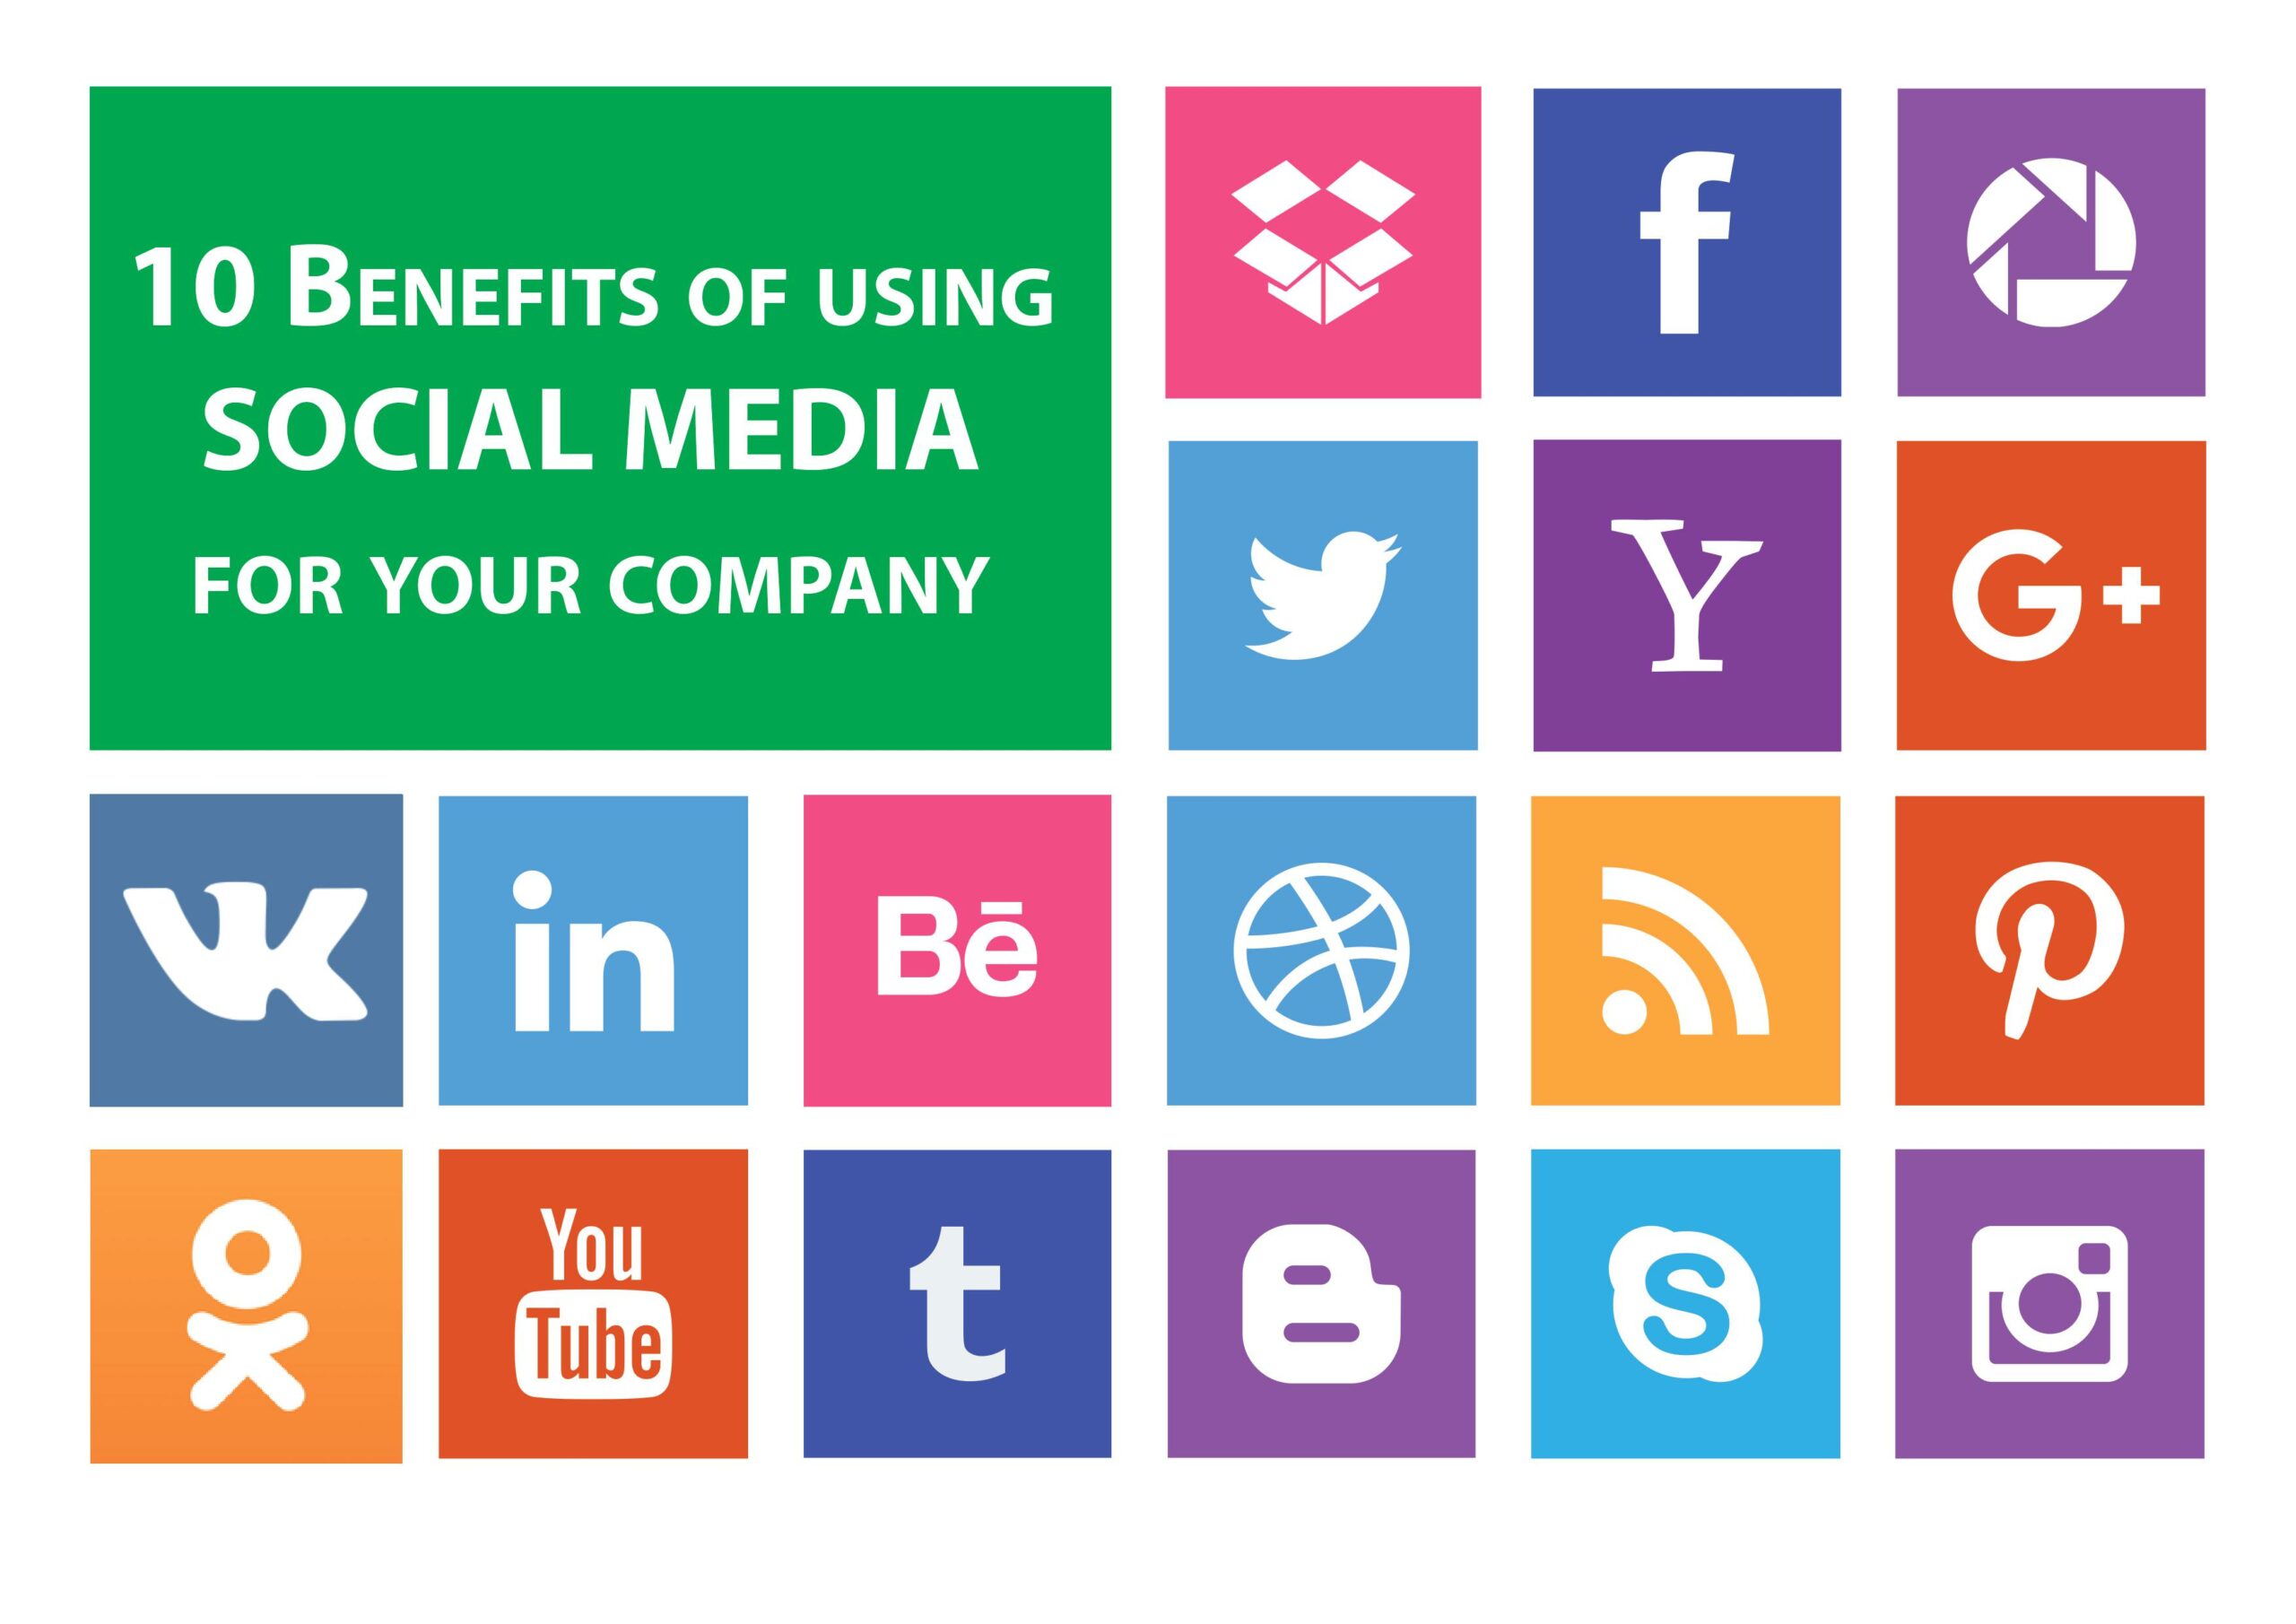 10 Benefits of using Social media for your company